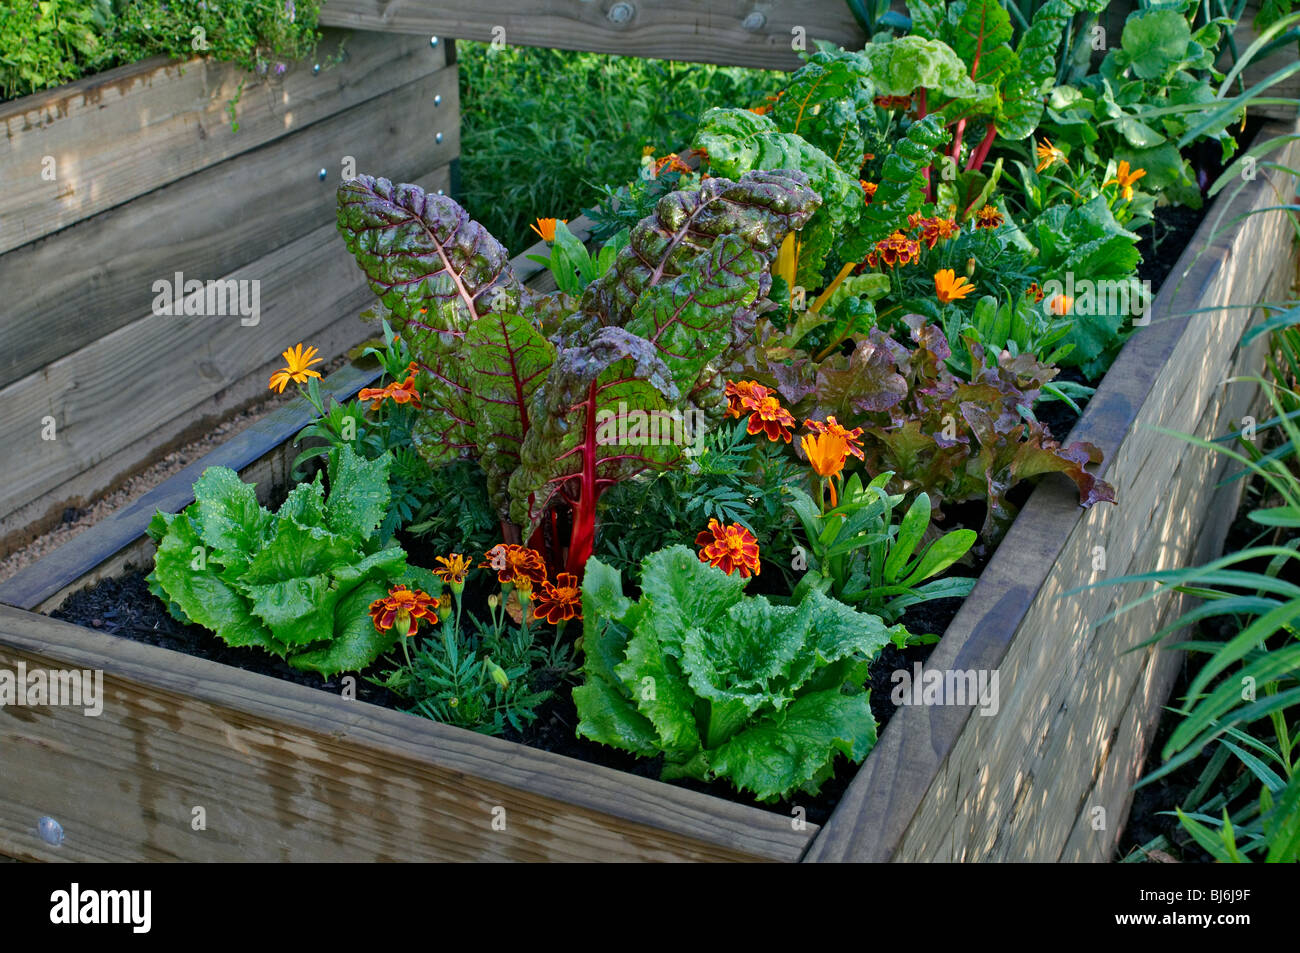 A raised bed opf vegetables and flowers in a urban garden Stock Photo